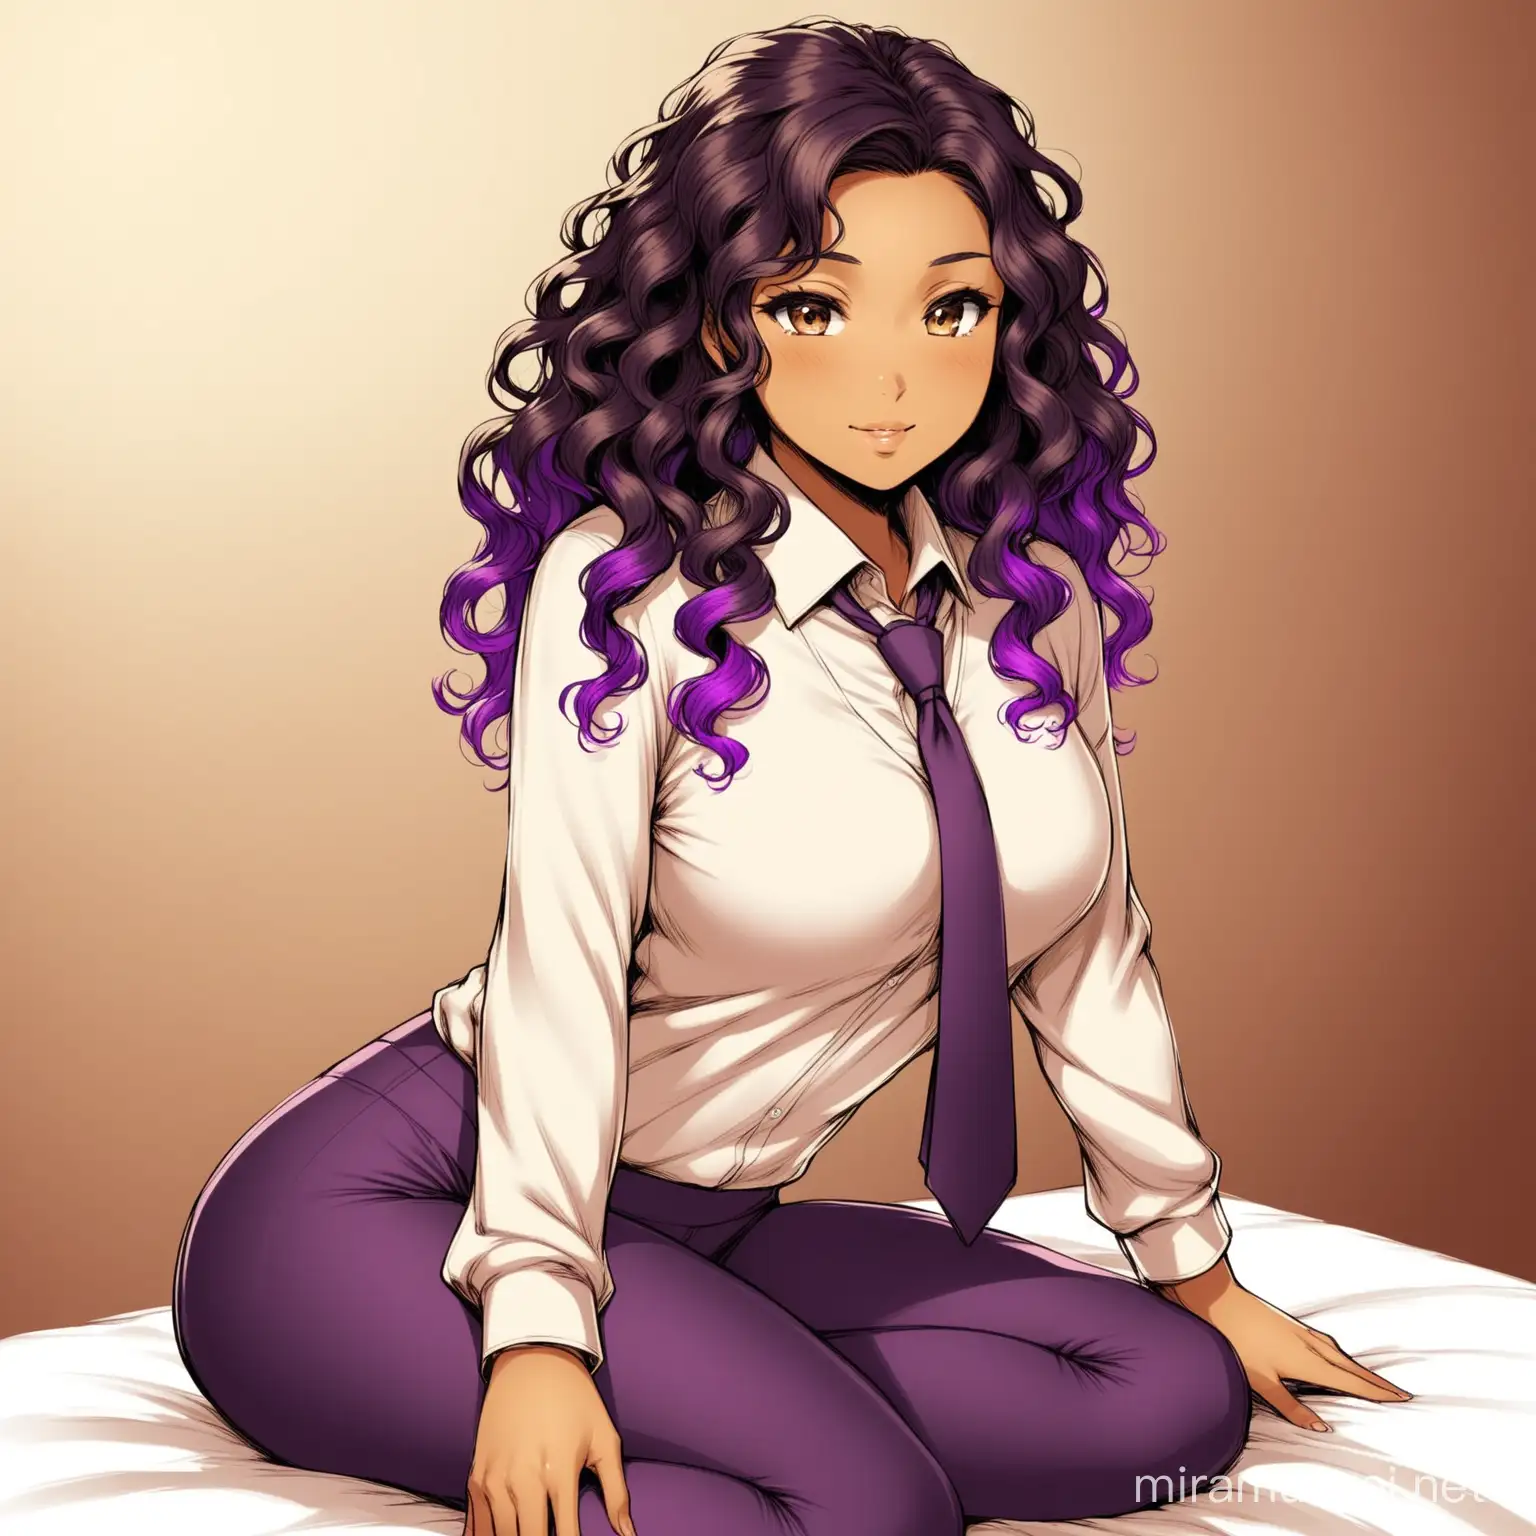 Sepia-toned skin
Curly hair that fades from black to a vibrant purple ombre
Considered very attractive by most, though she doesn't seem aware of it
When not working, she prefers comfortable sweaters and yoga pants
For the news, she wears professional suits and ties. NSFW